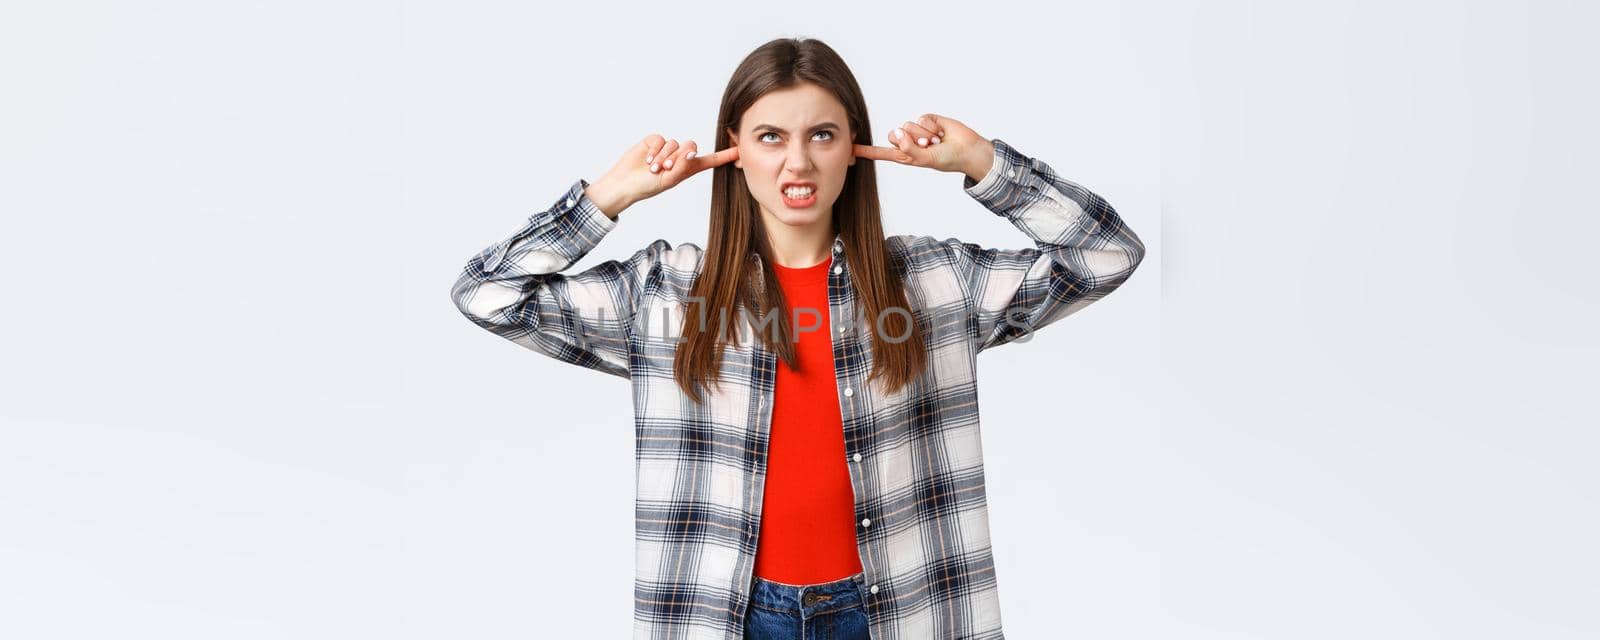 Lifestyle, different emotions, leisure activities concept. Pissed-off angry young female student in dormitory bothered by loud neighbours upstairs, staring up furious, shut ears from noisy music.